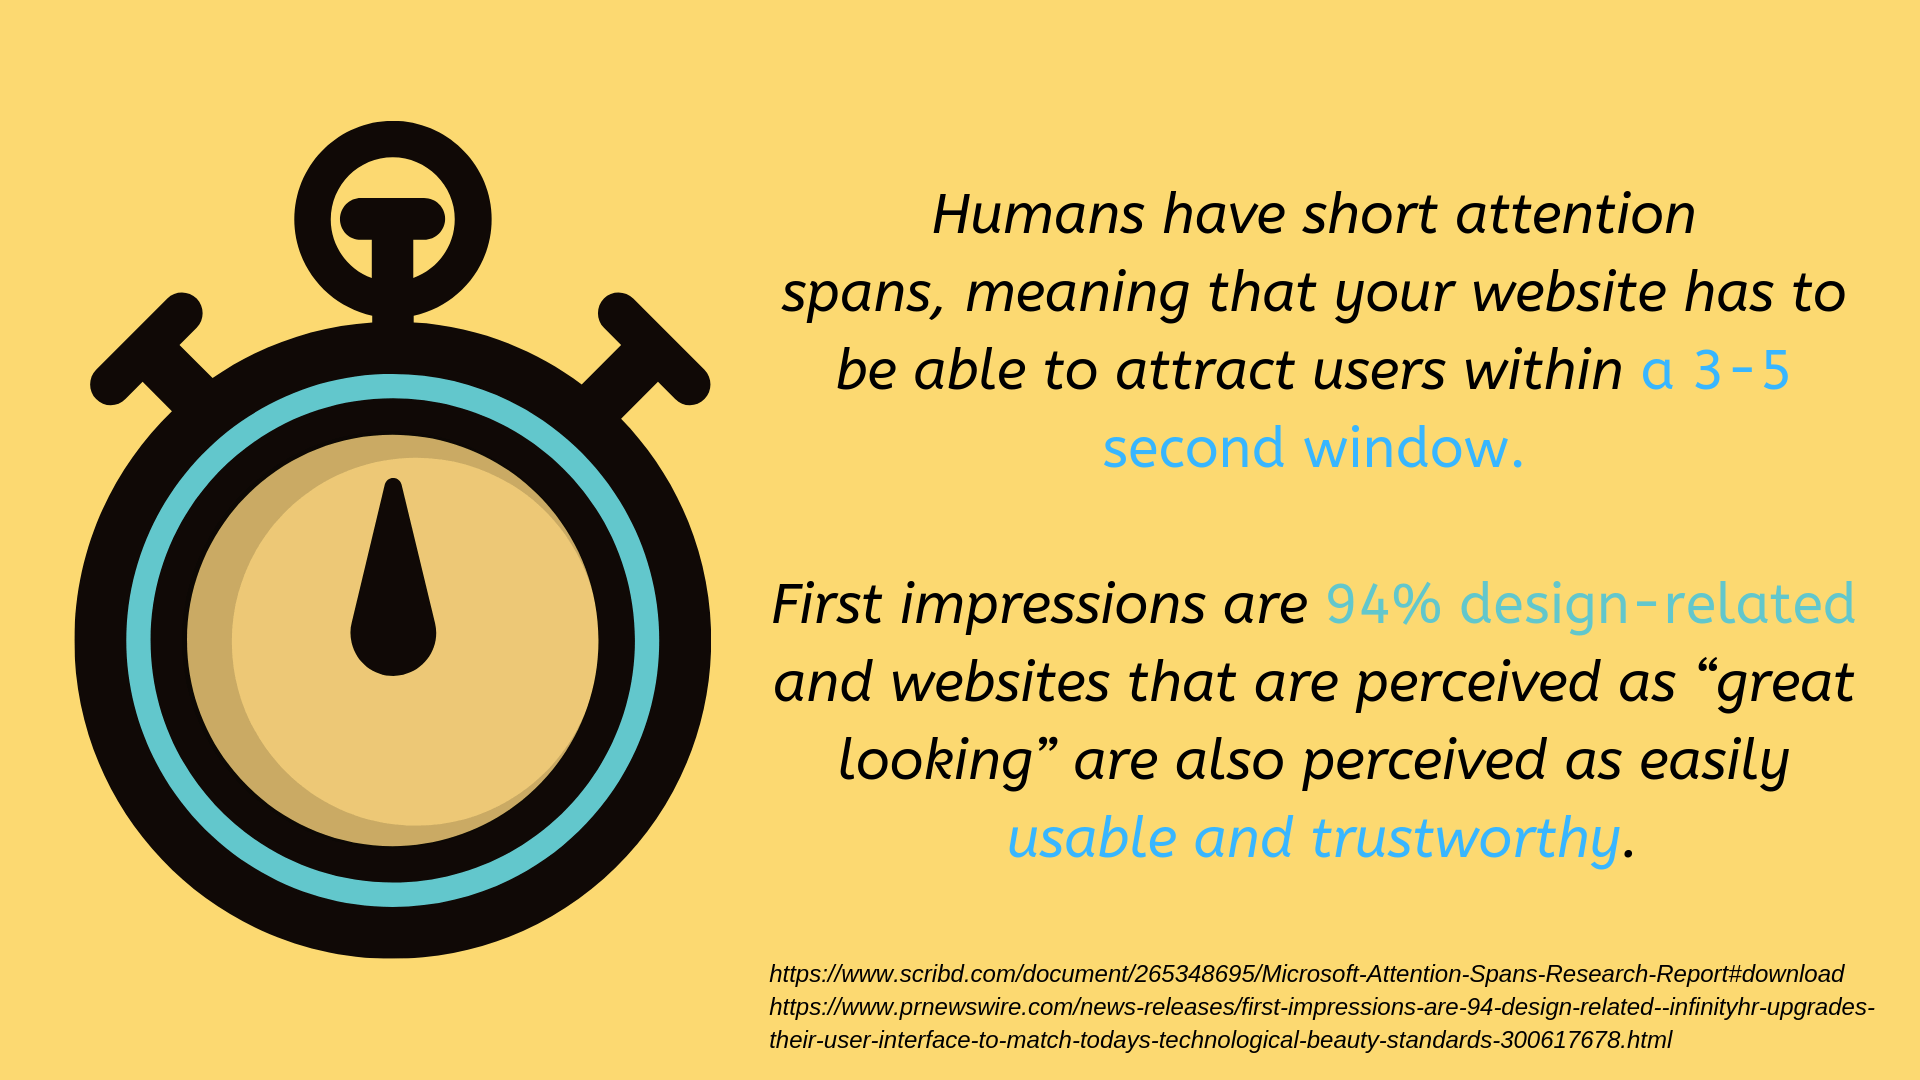 human attention span is short and website design is important 